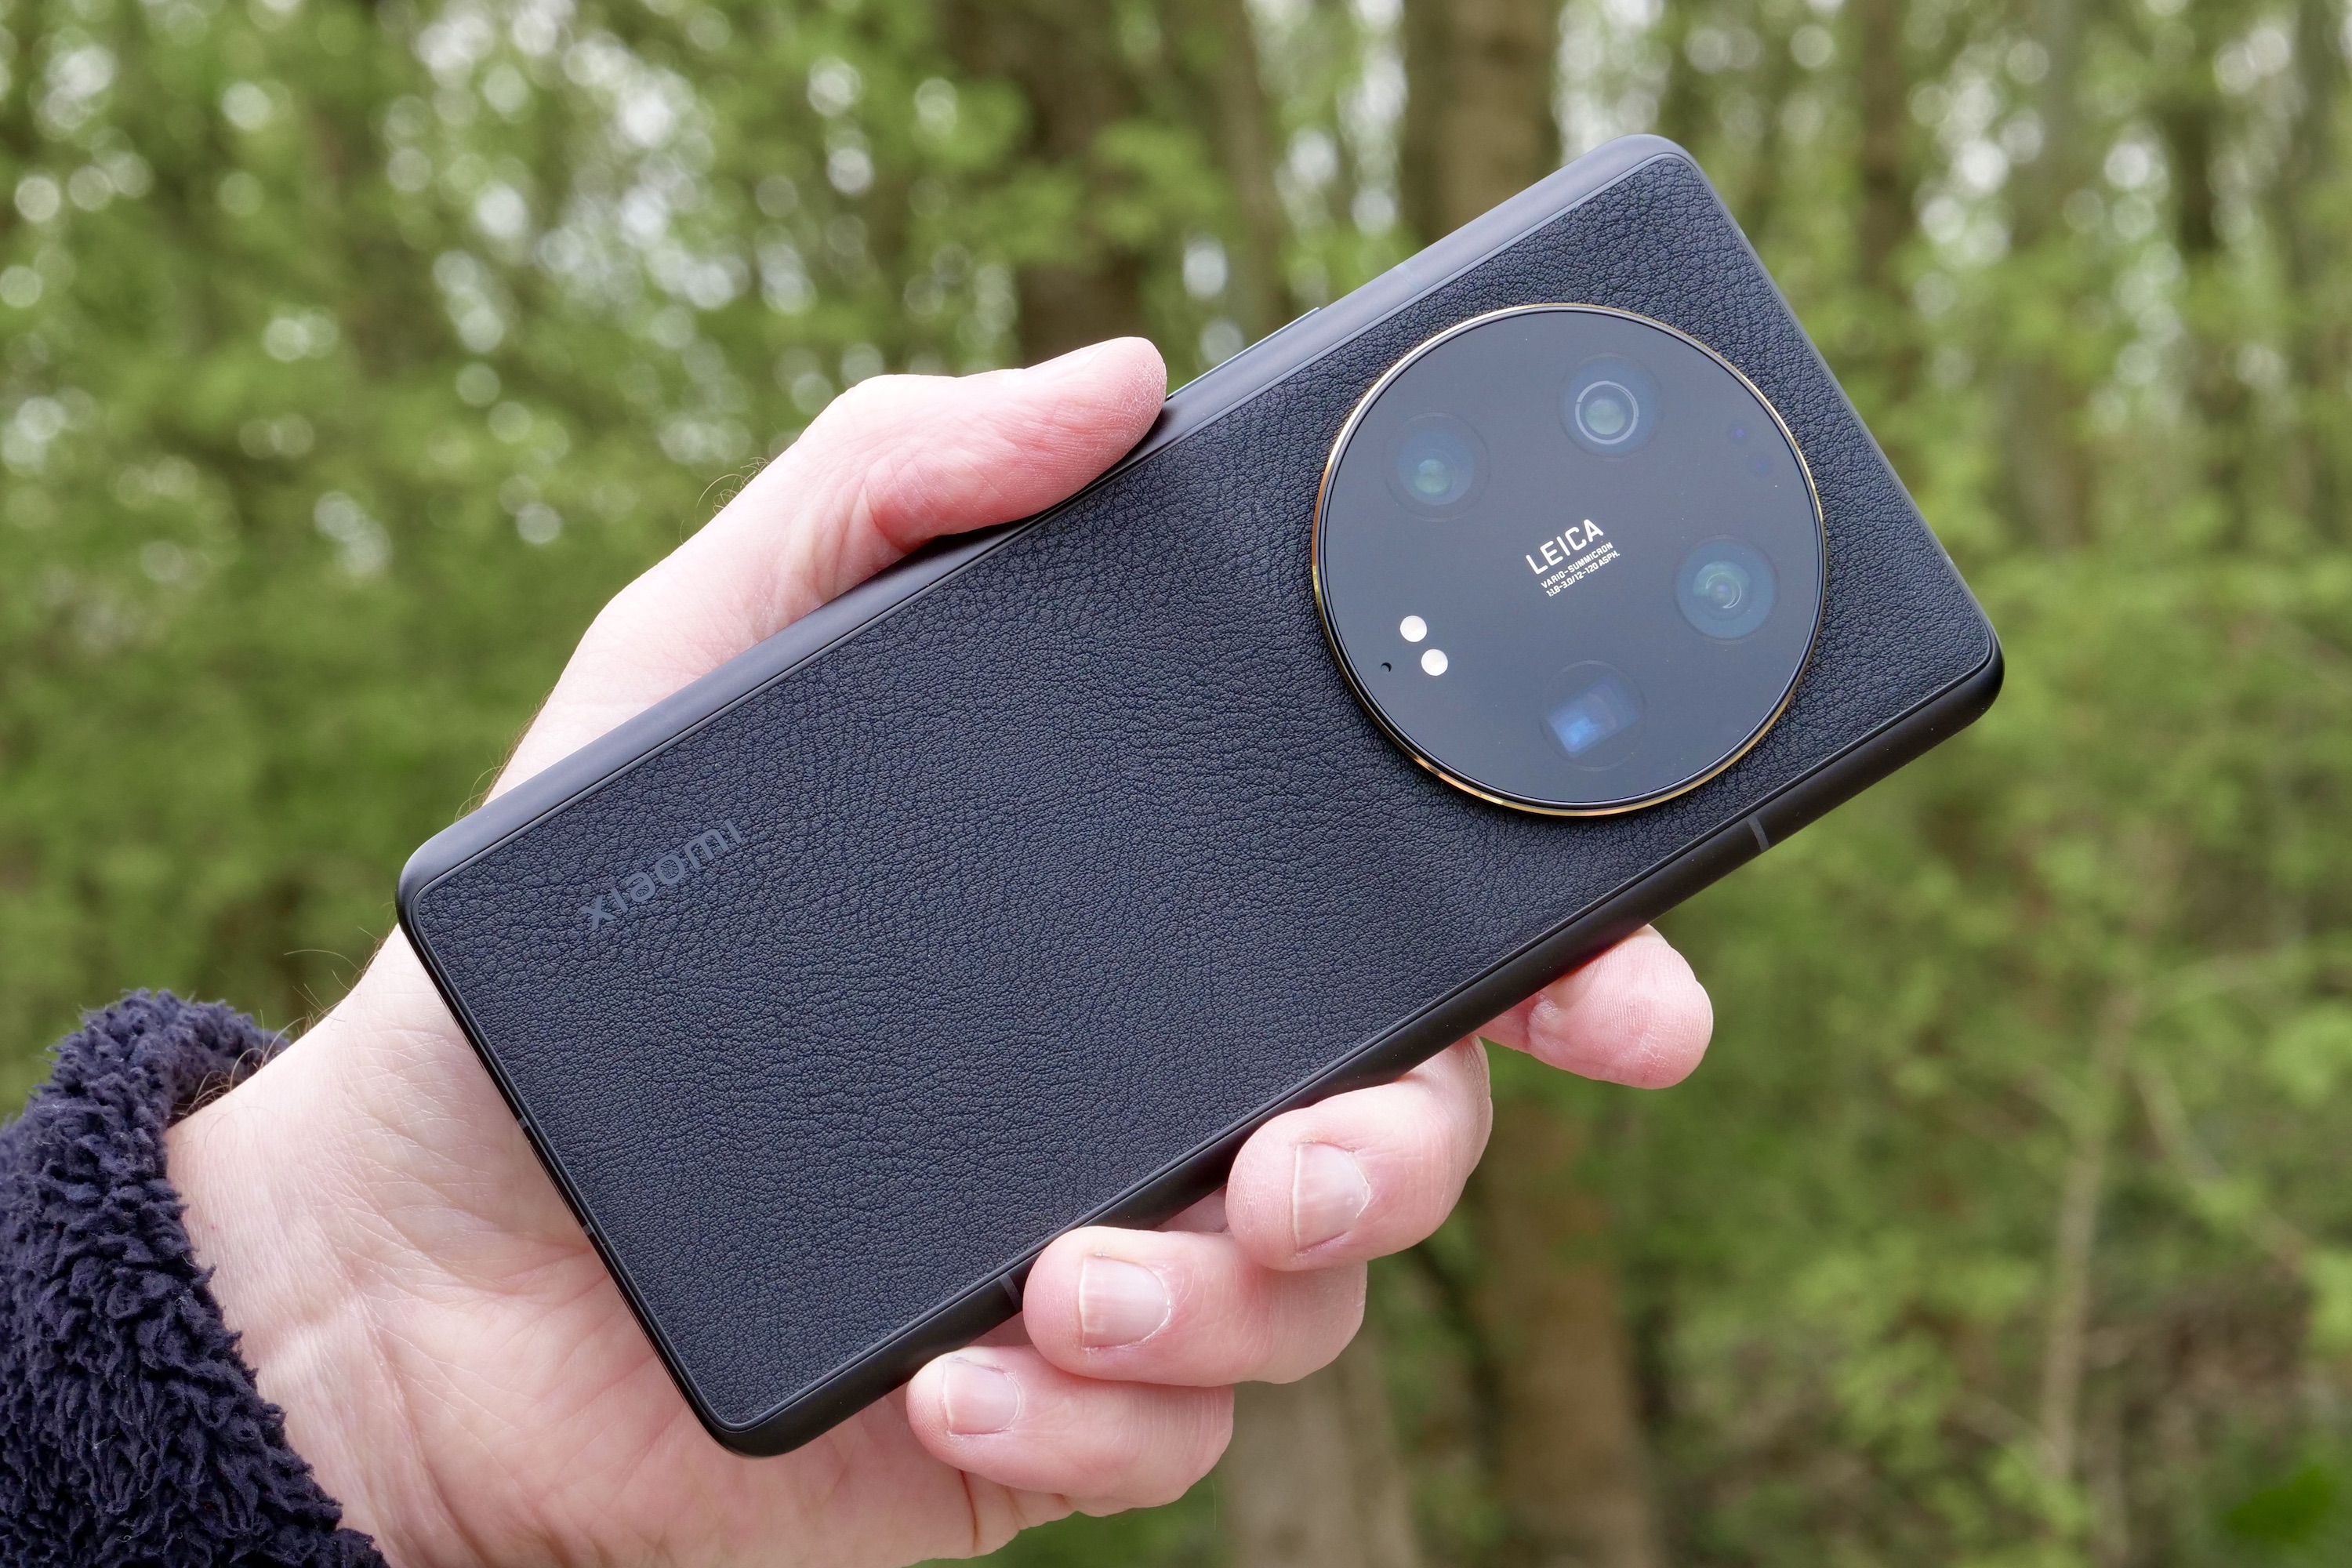 Xiaomi 13 Ultra: Is It A Camera Which Can Call?